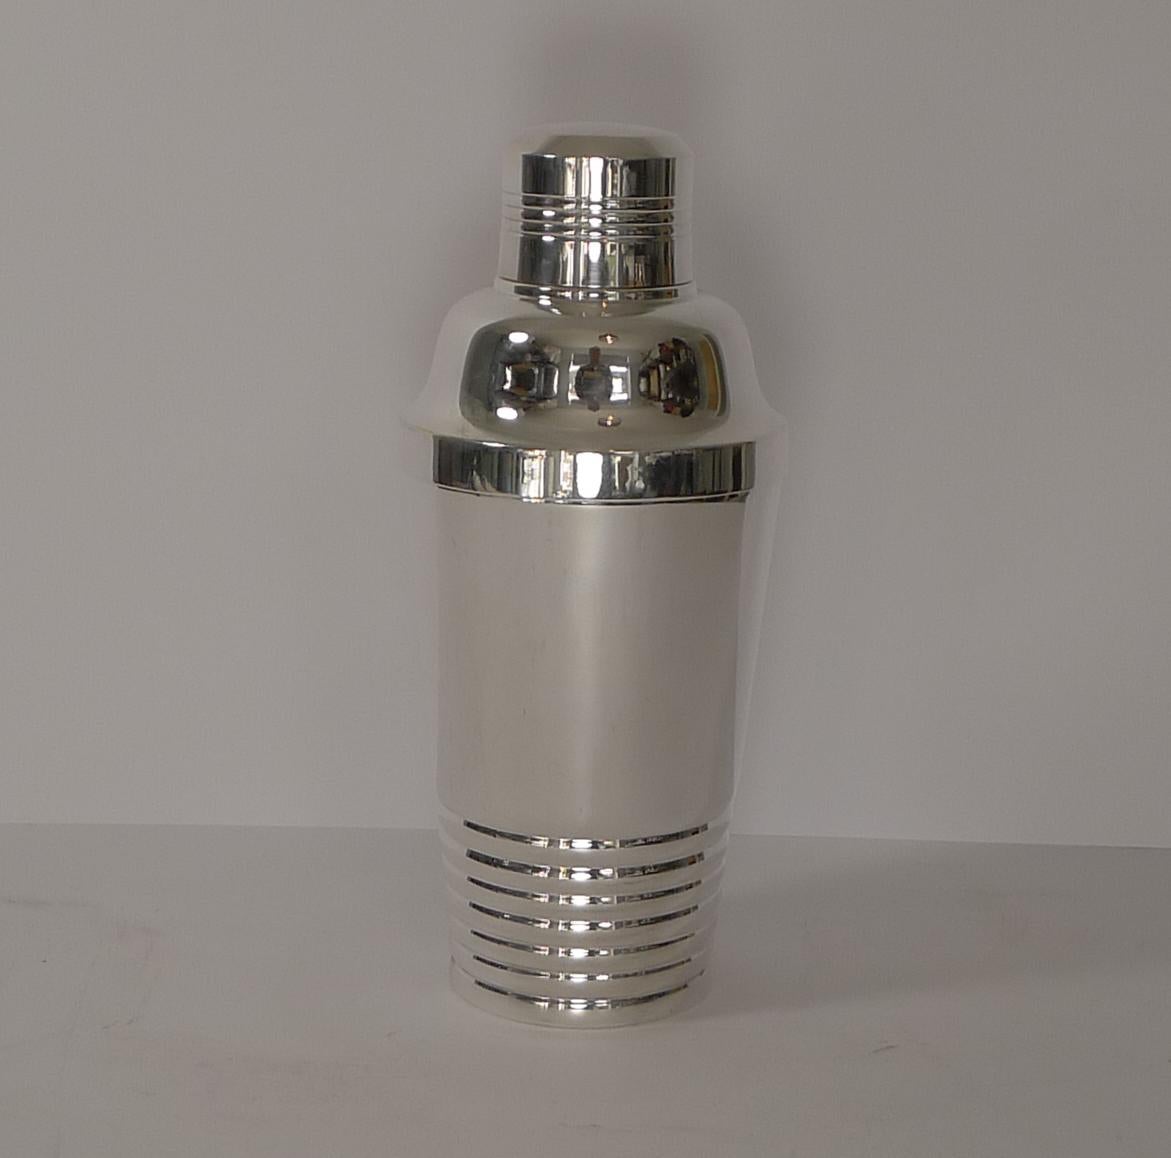 A superb French Art Deco Cocktail Shaker dating to the 1930's and in fabulous condition having just been professionally cleaned and polished in our silversmith's workshop.

The underside is marked as per the photographs.

Measures: 8